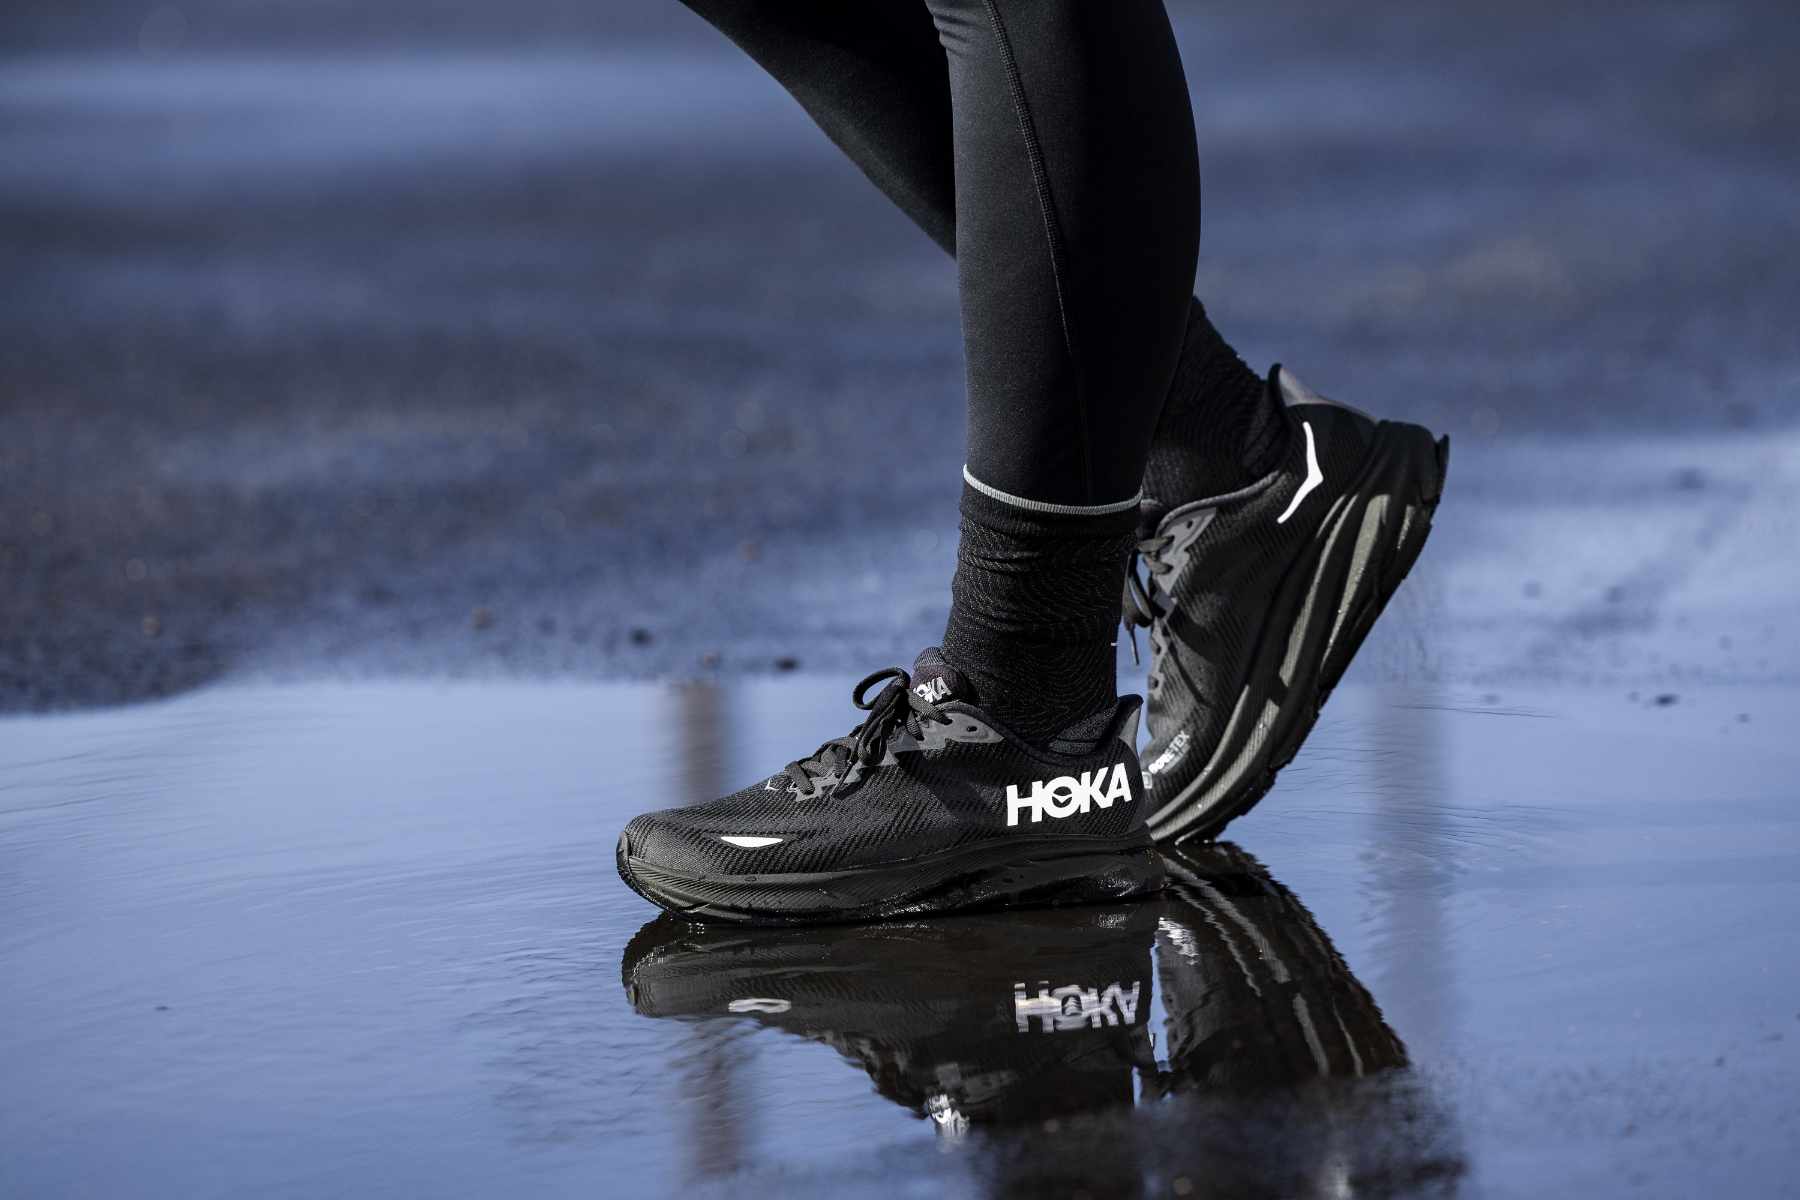 HOKA's Clifton 9 sneaker in a black GORE-TEX-lined colorway